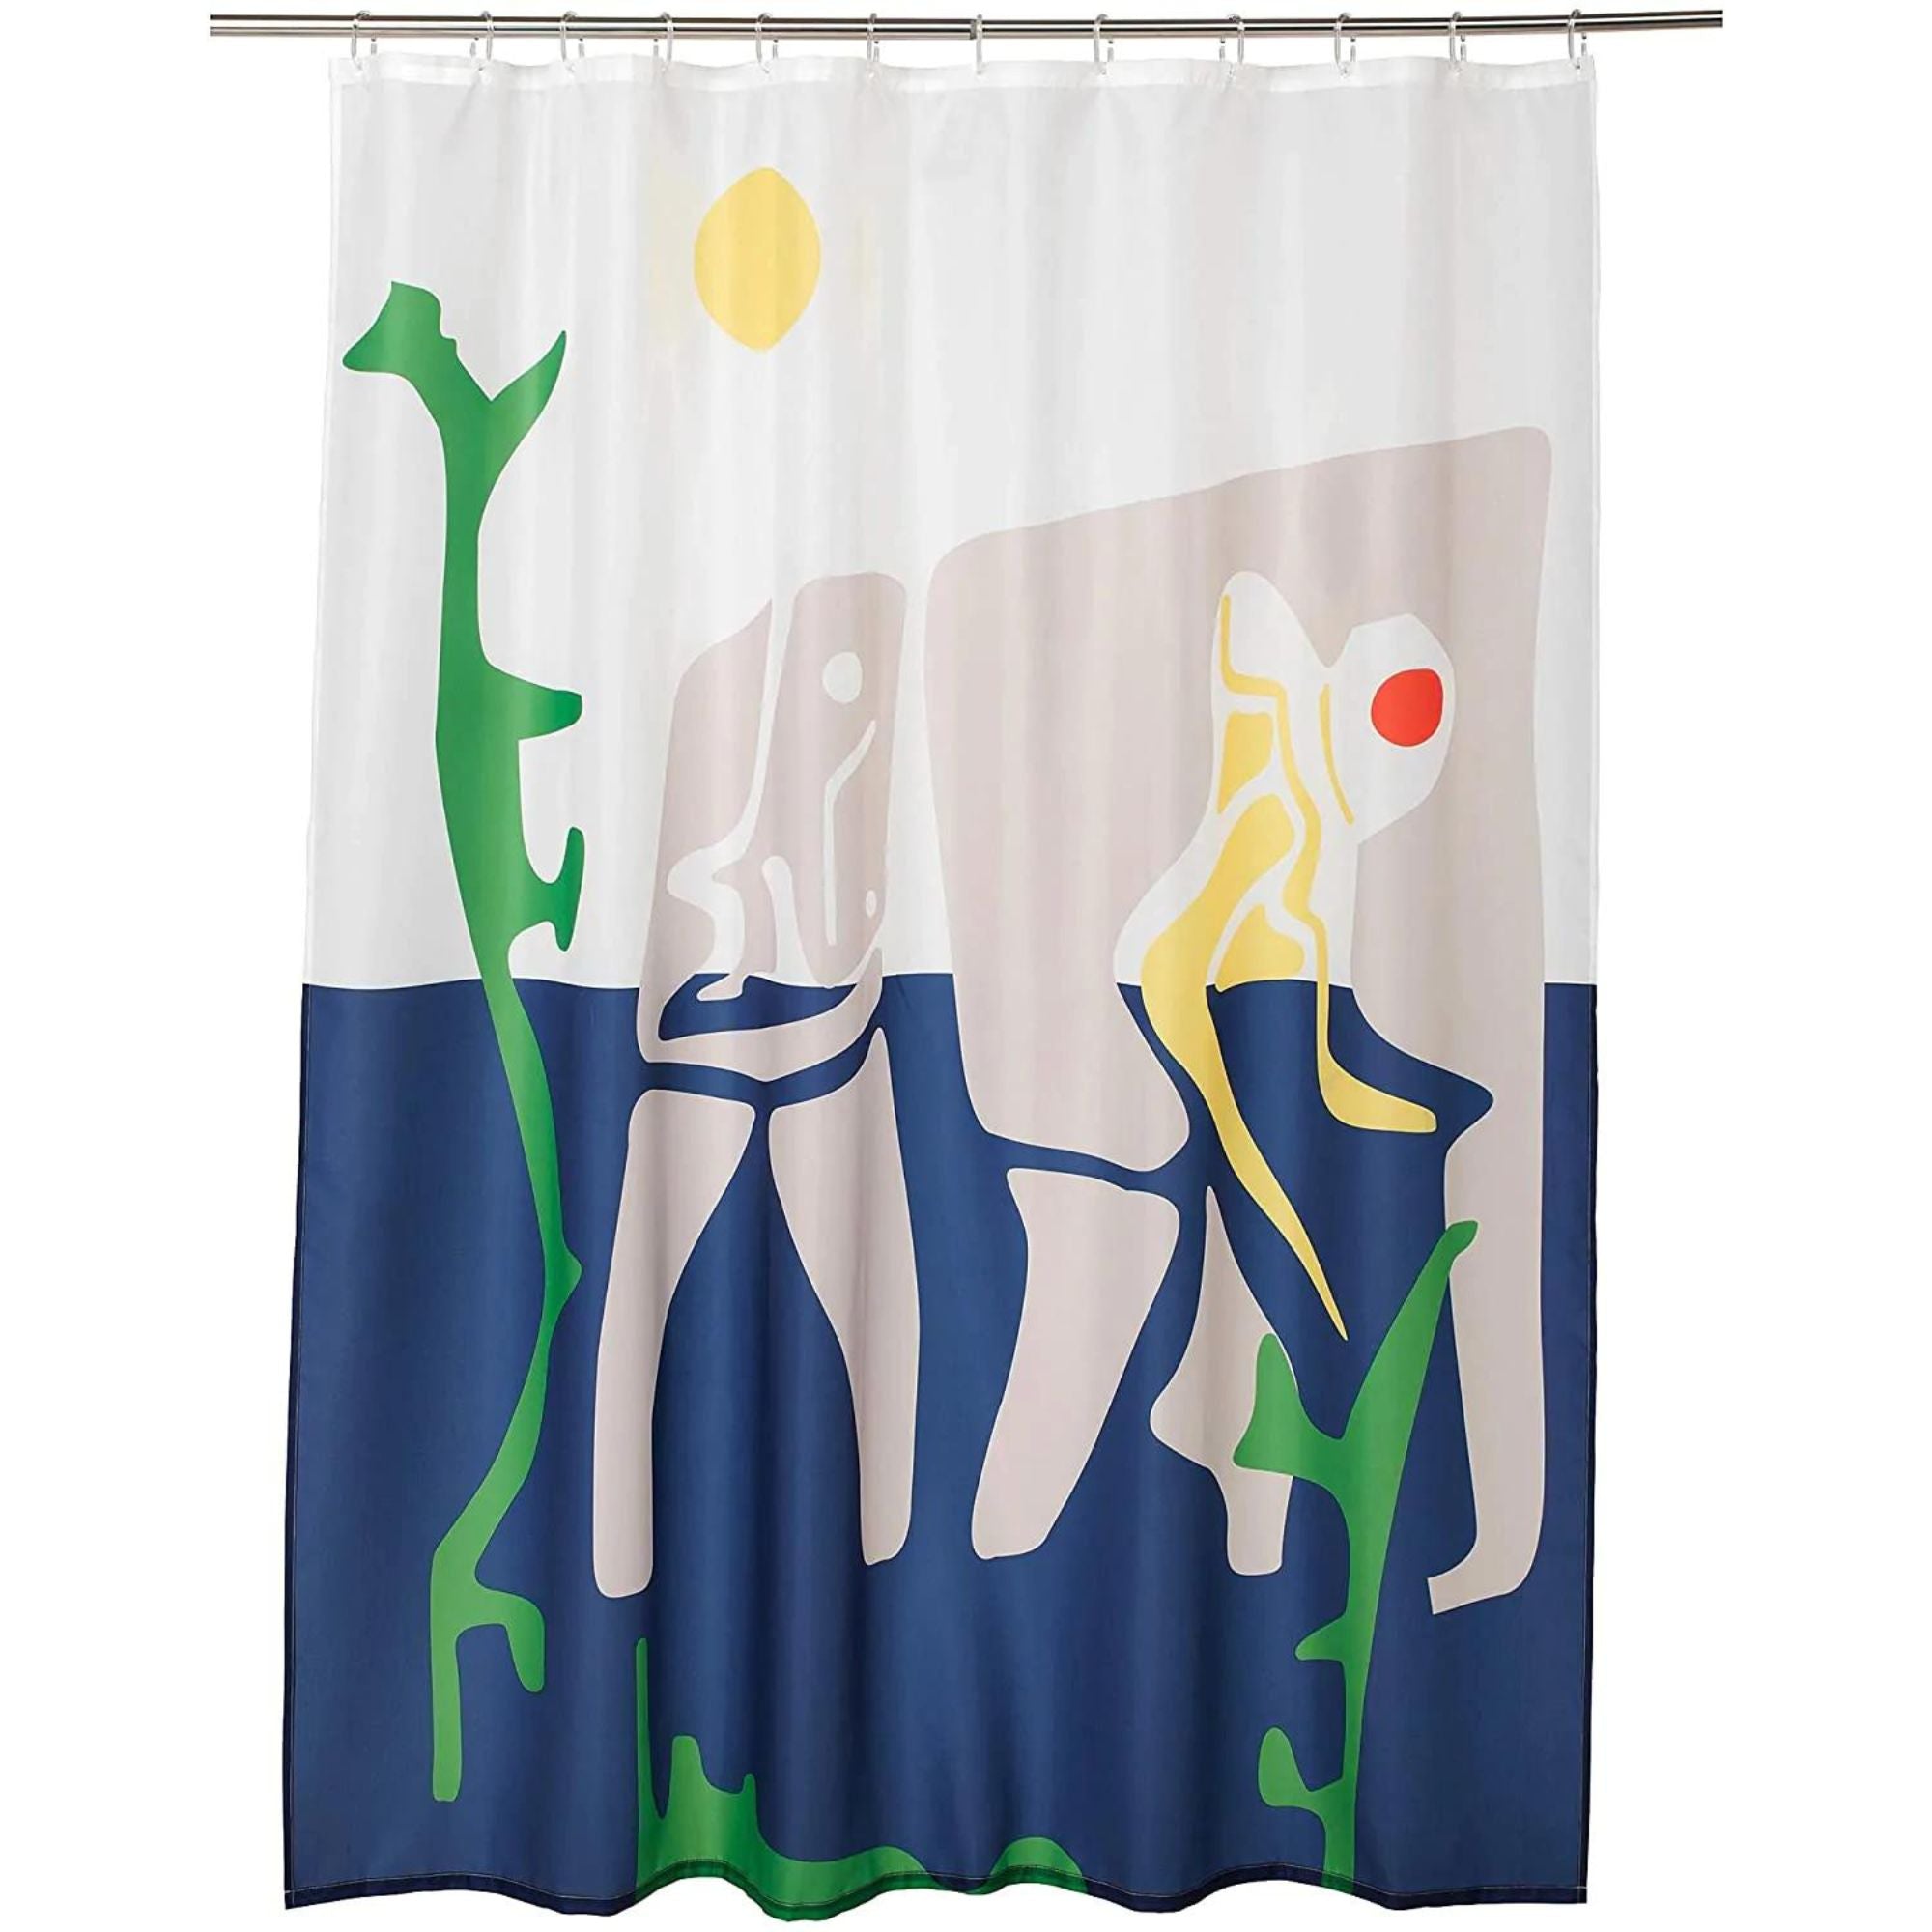 Shower Curtain Set of 2, Bathroom Fabric Curtains Waterproof Colorful with Hooks Size 71 by 71